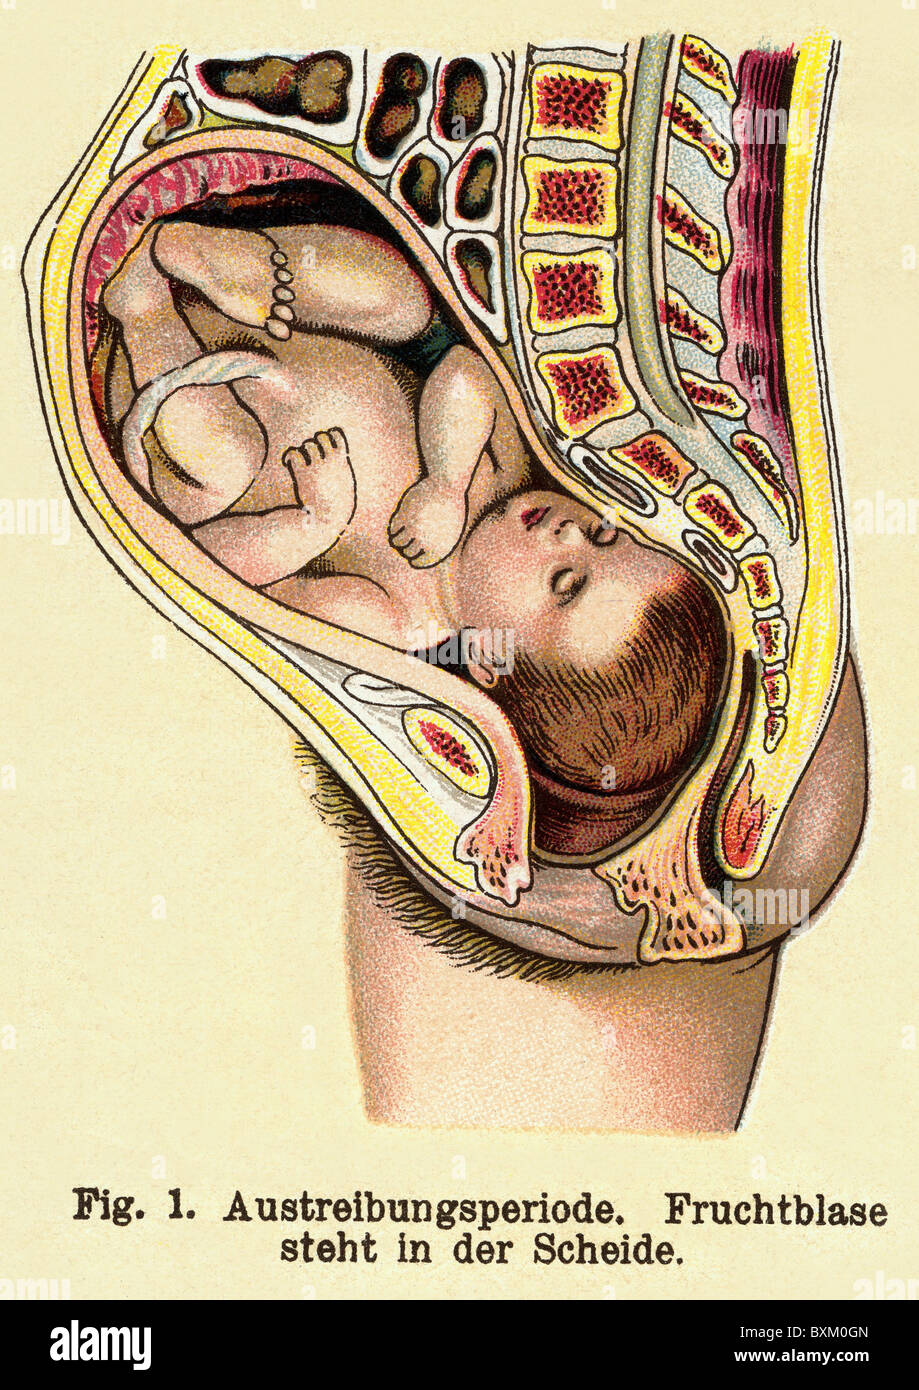 medicine, gynecology, birth, phase shortly before childbirth, lithograph, Germany, circa 1905, Additional-Rights-Clearences-Not Available Stock Photo